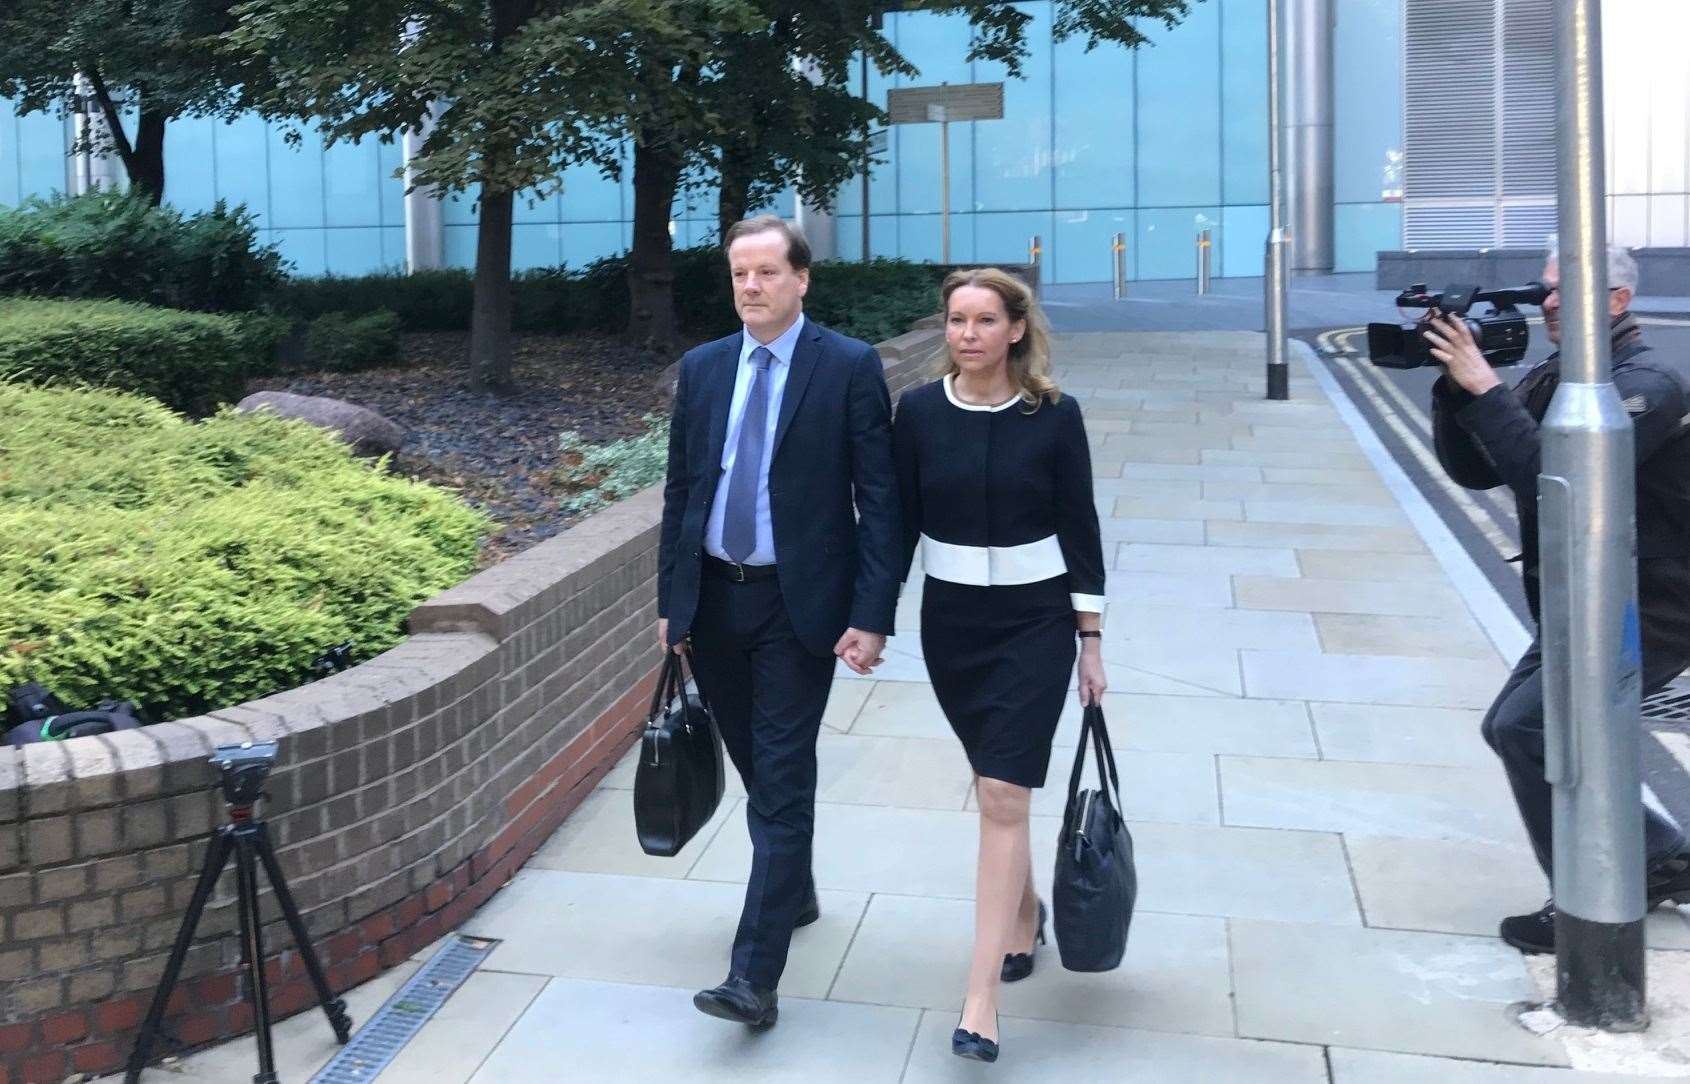 Charlie Elphicke with his wife Natalie arriving at Southwark Crown Court during his three week trial